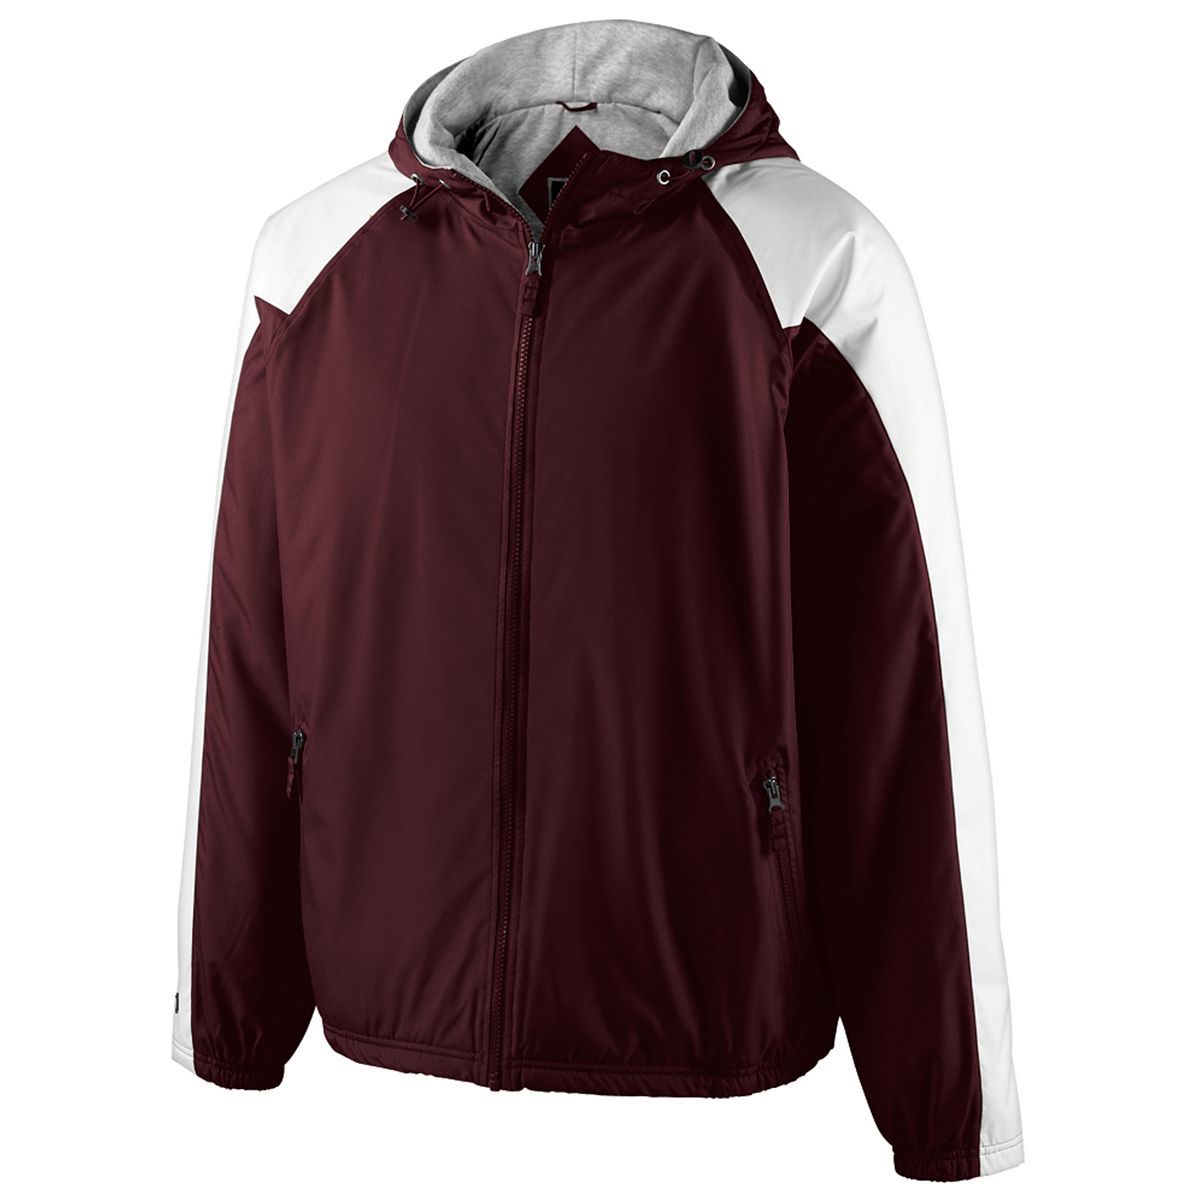 Holloway Homefield Jacket in Maroon/White  -Part of the Adult, Adult-Jacket, Holloway, Outerwear product lines at KanaleyCreations.com